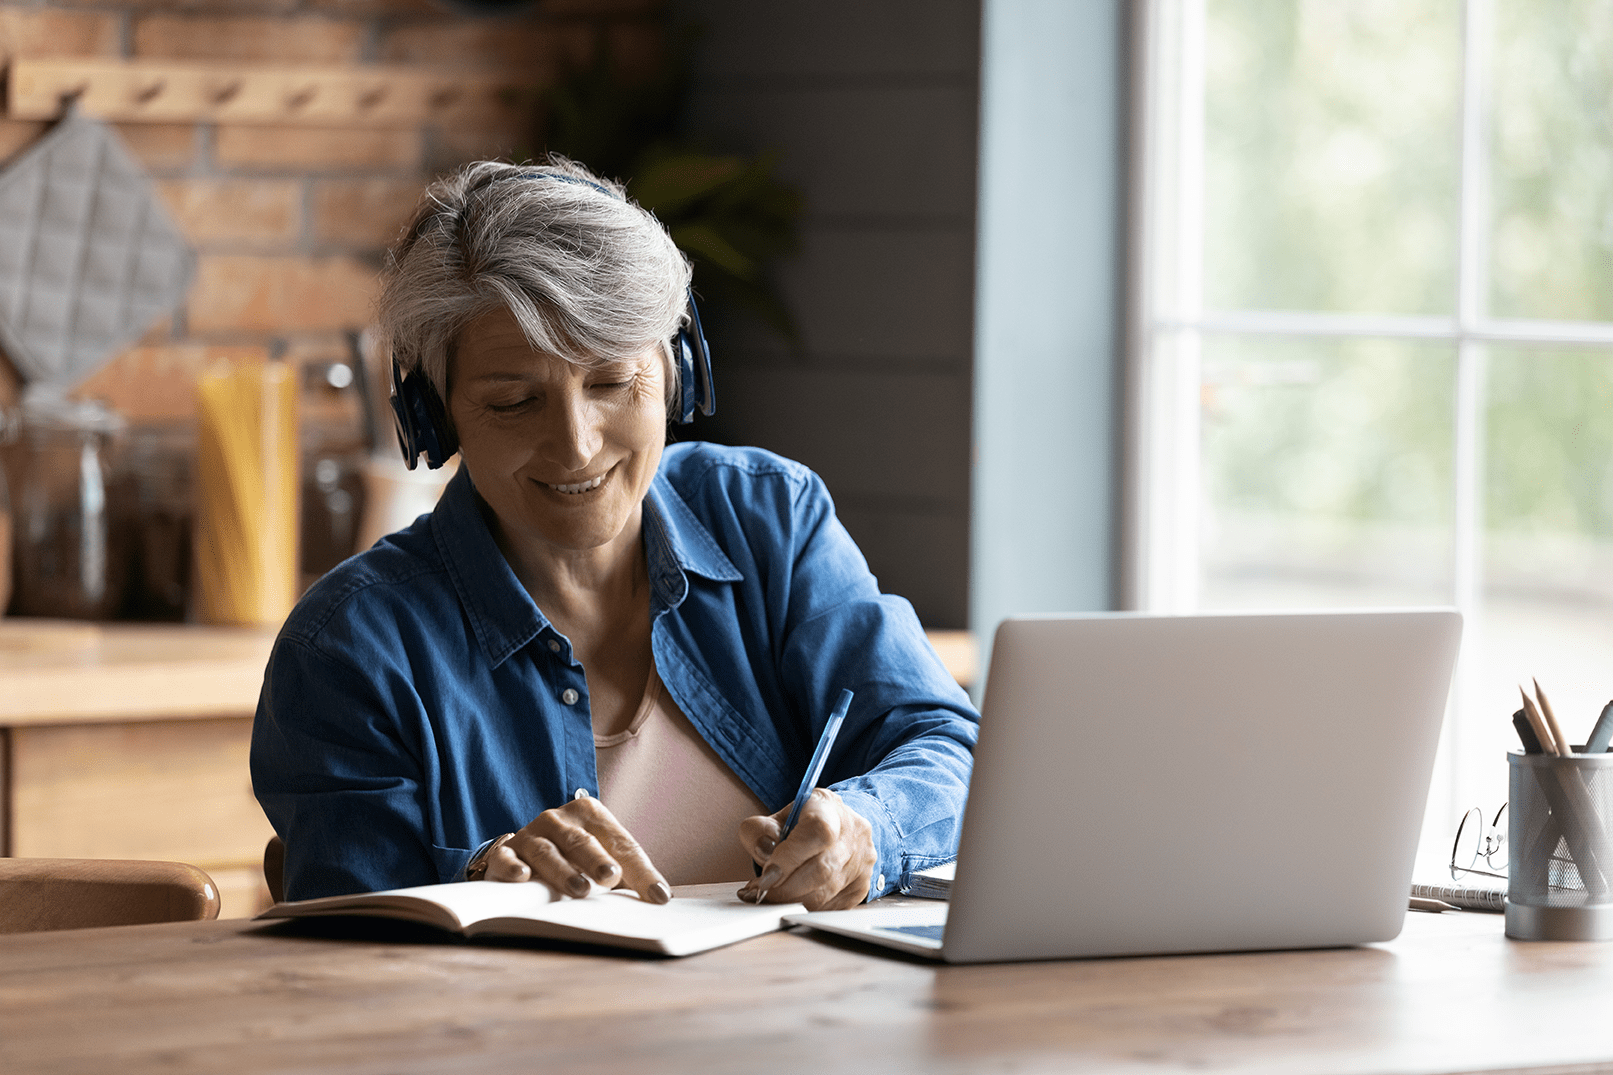 Lady sitting at kitchen table writing on notepad with open laptop in front of her